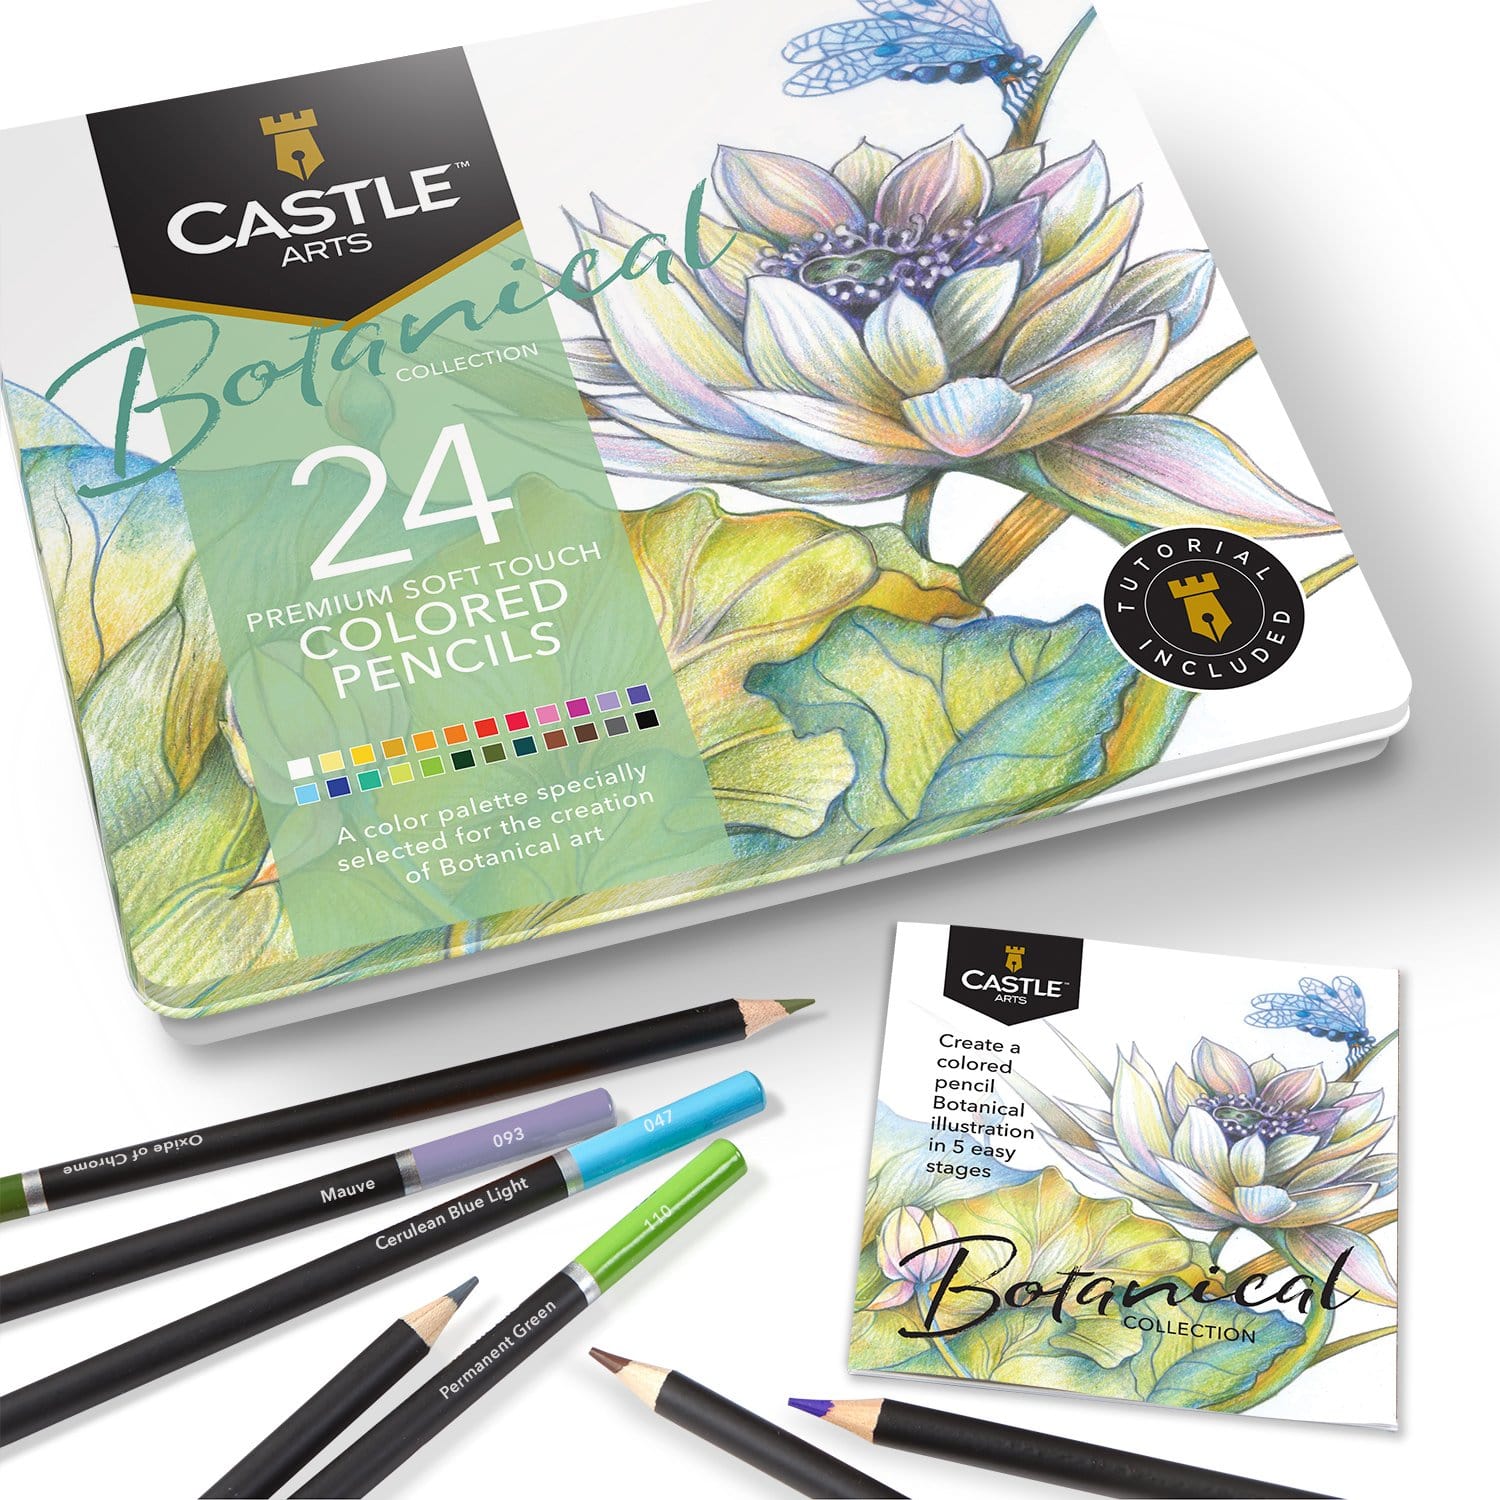 Castle Art Supplies 120 Colored Pencil Set for Artists, Featuring 'Soft Series